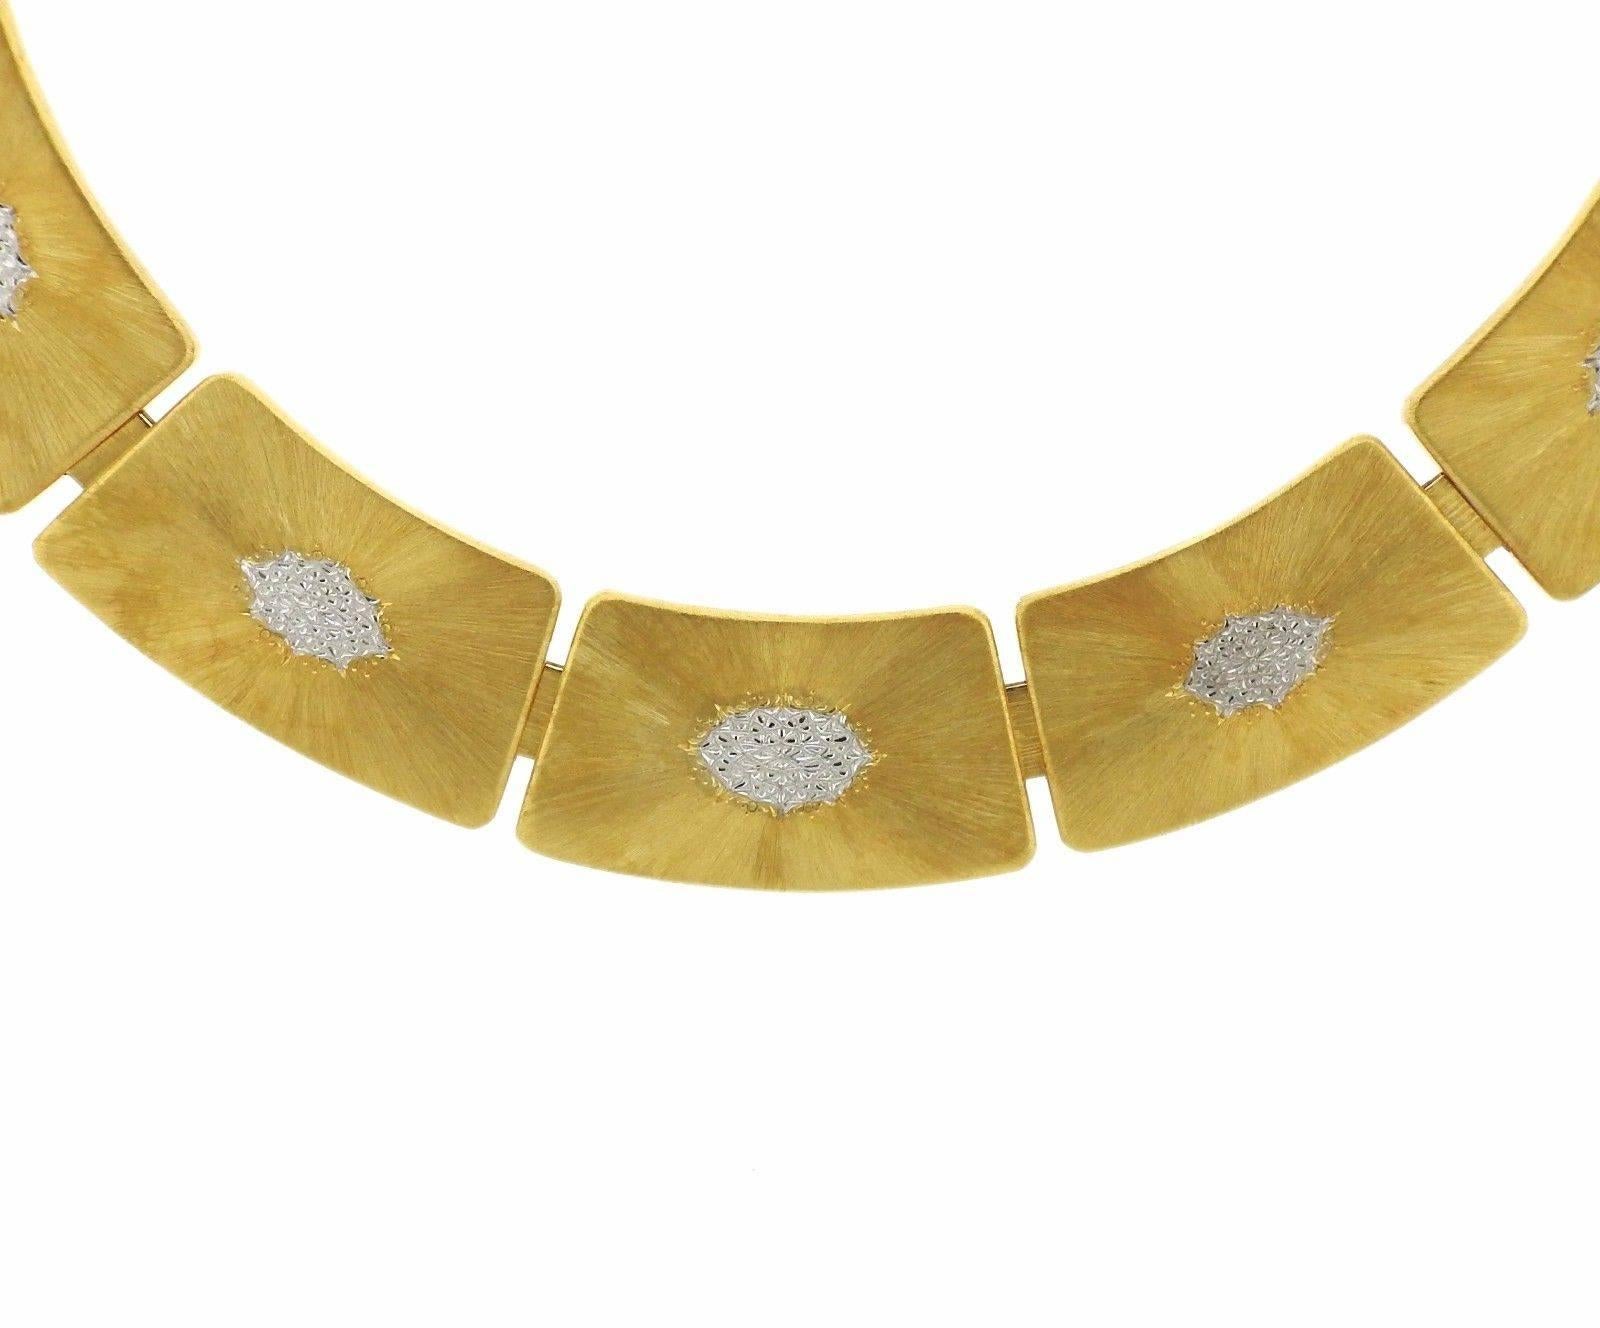 An 18k yellow and white gold necklace. Necklace measures 14